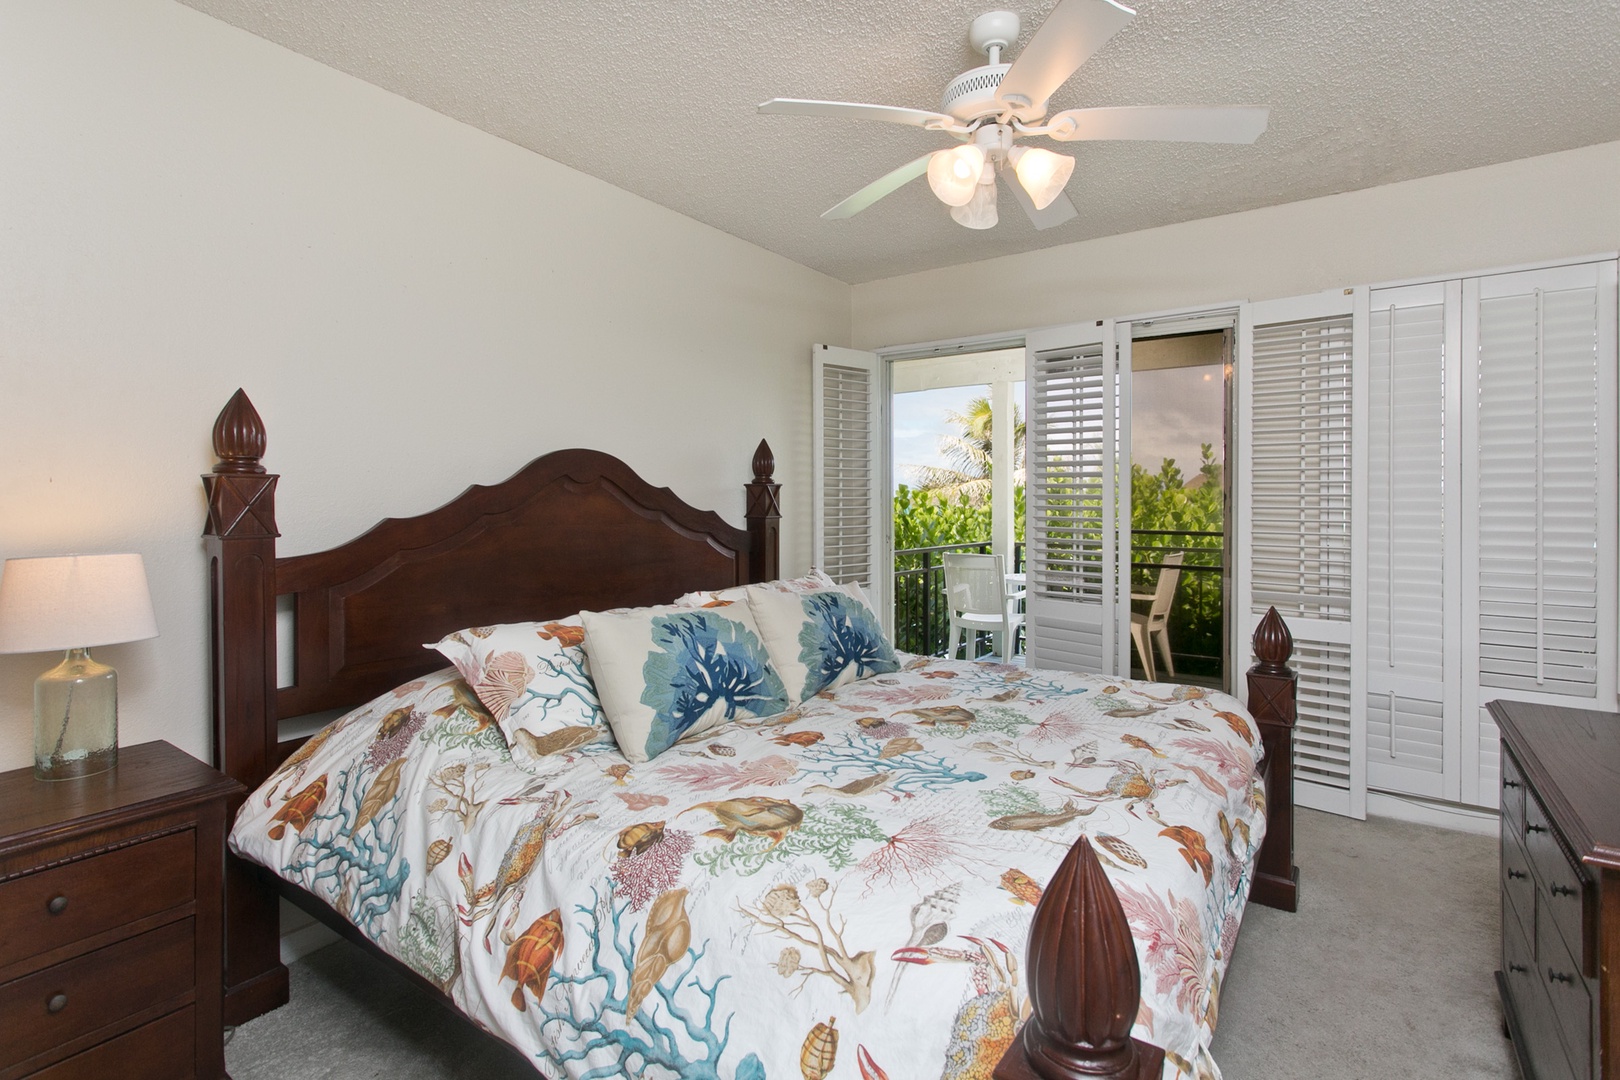 Kailua Vacation Rentals, Lanikai Village* - Hale Kolea: Guest bedroom with a plush king bed and private lanai.